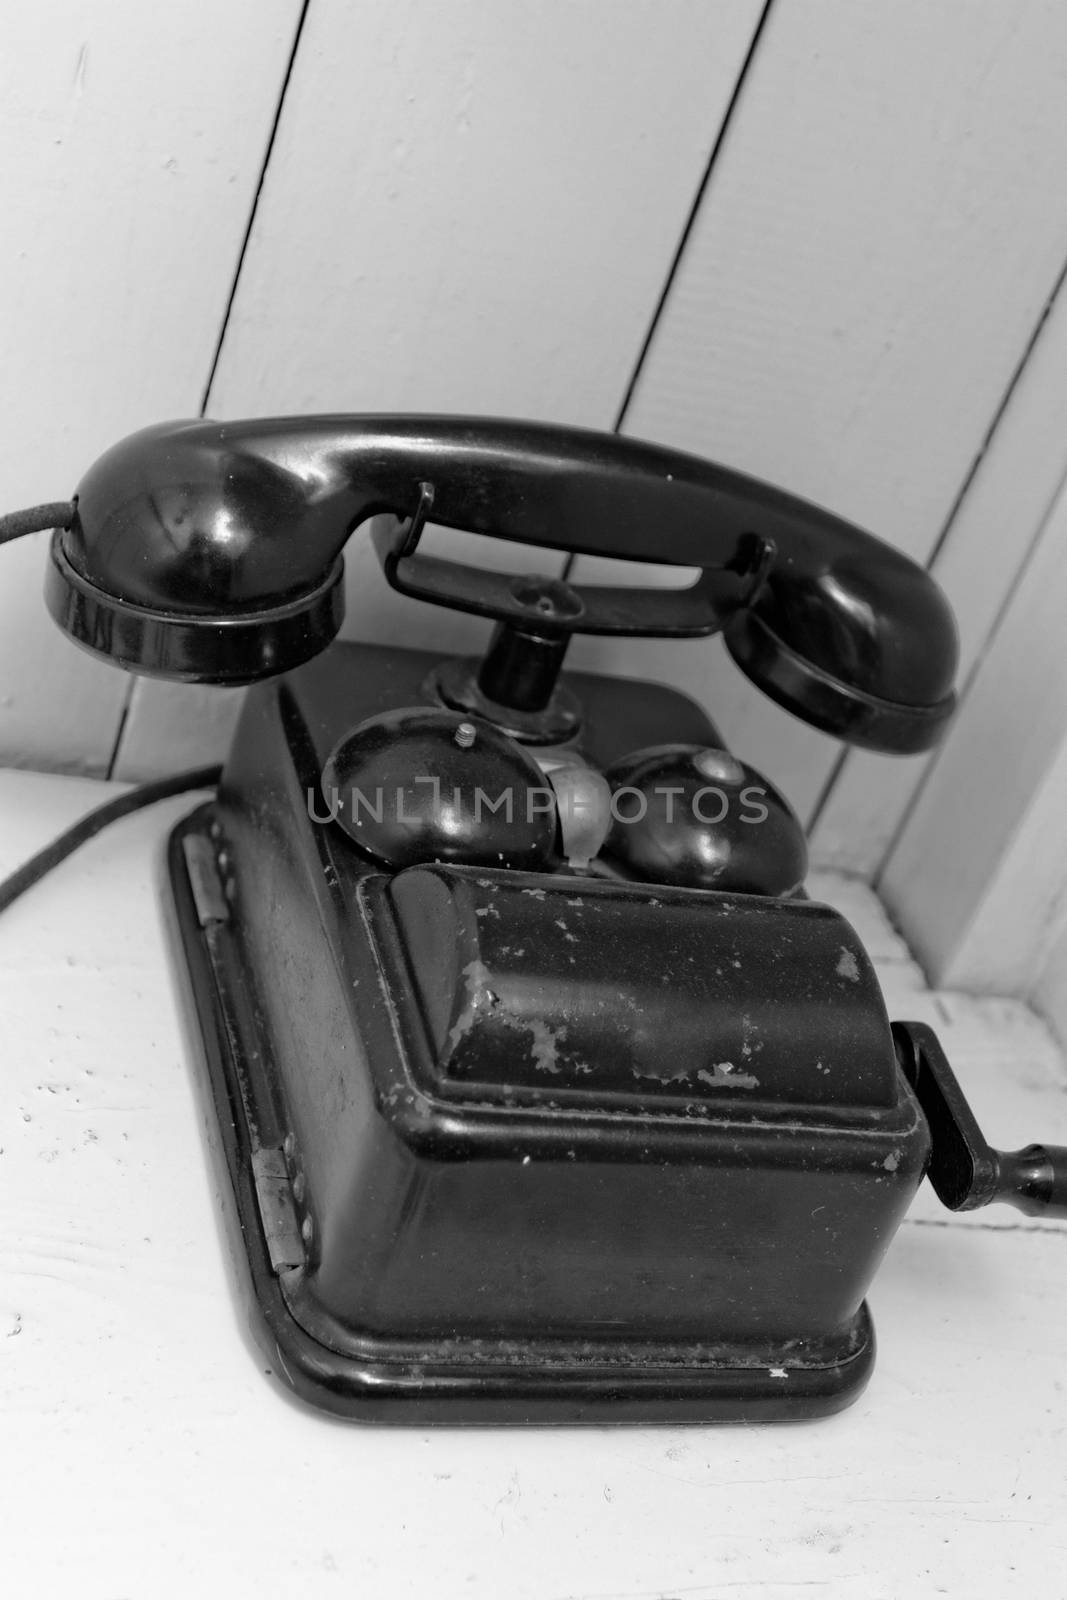 Photo of a black telephone from the World War II